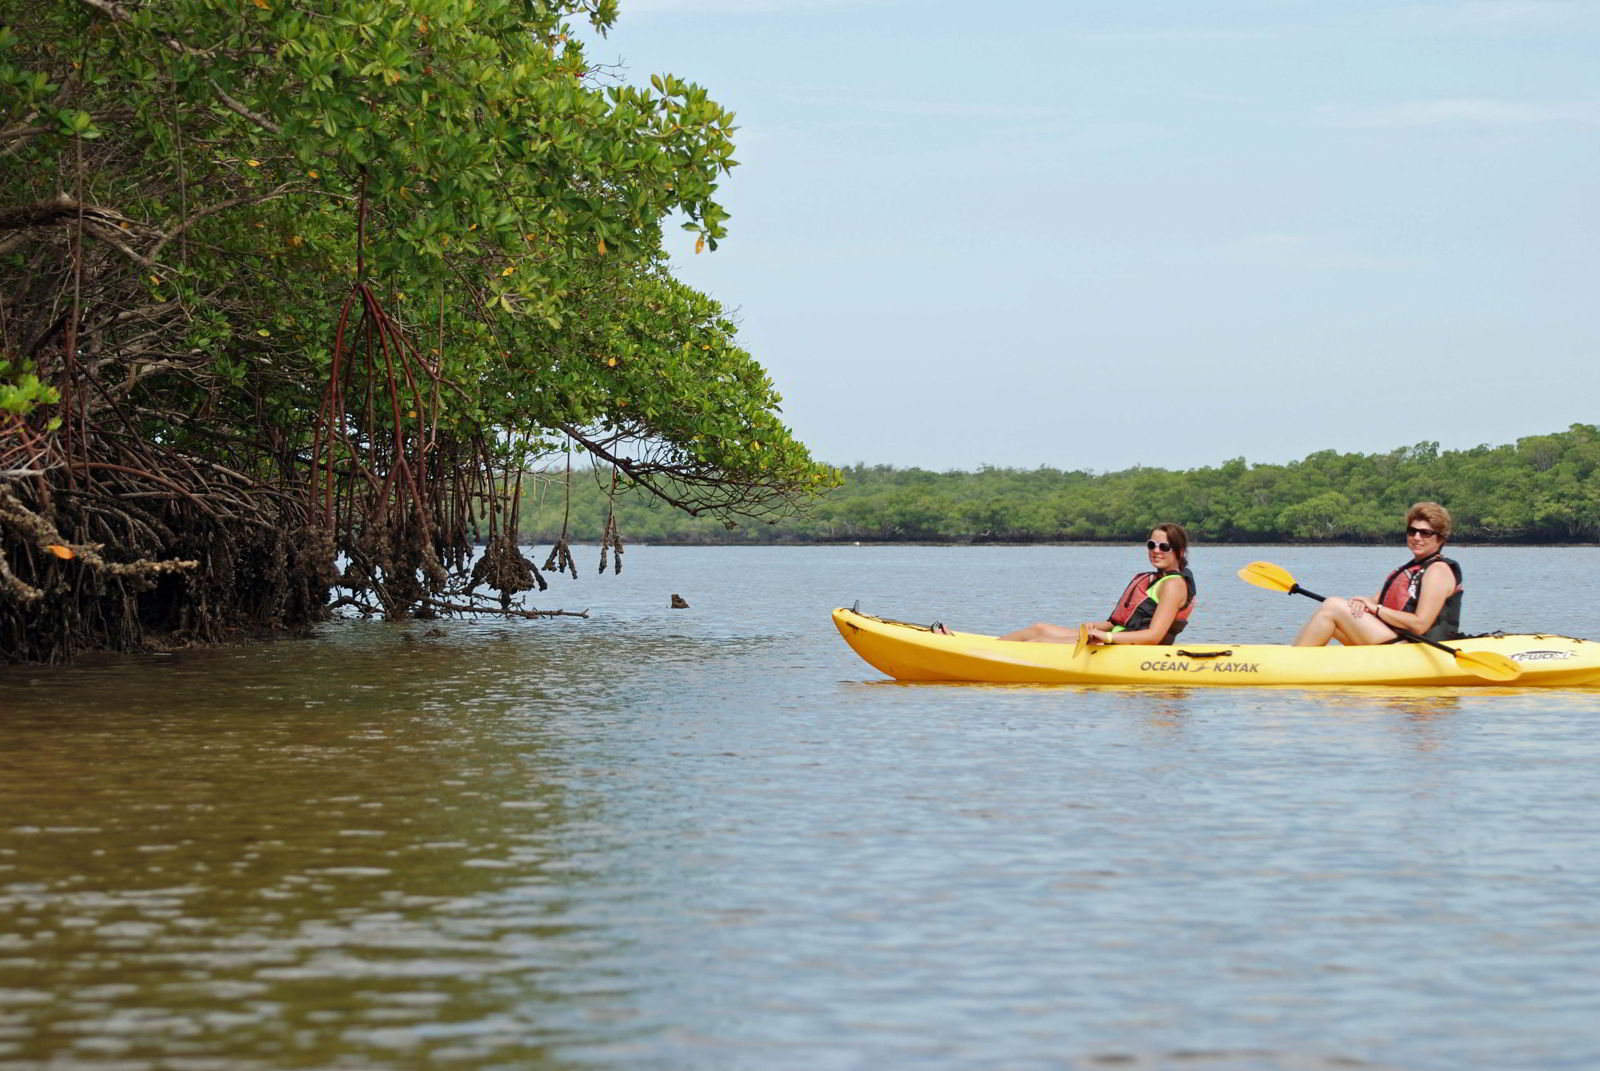 An image of two women in kayak in the Florida Everglades, USA.